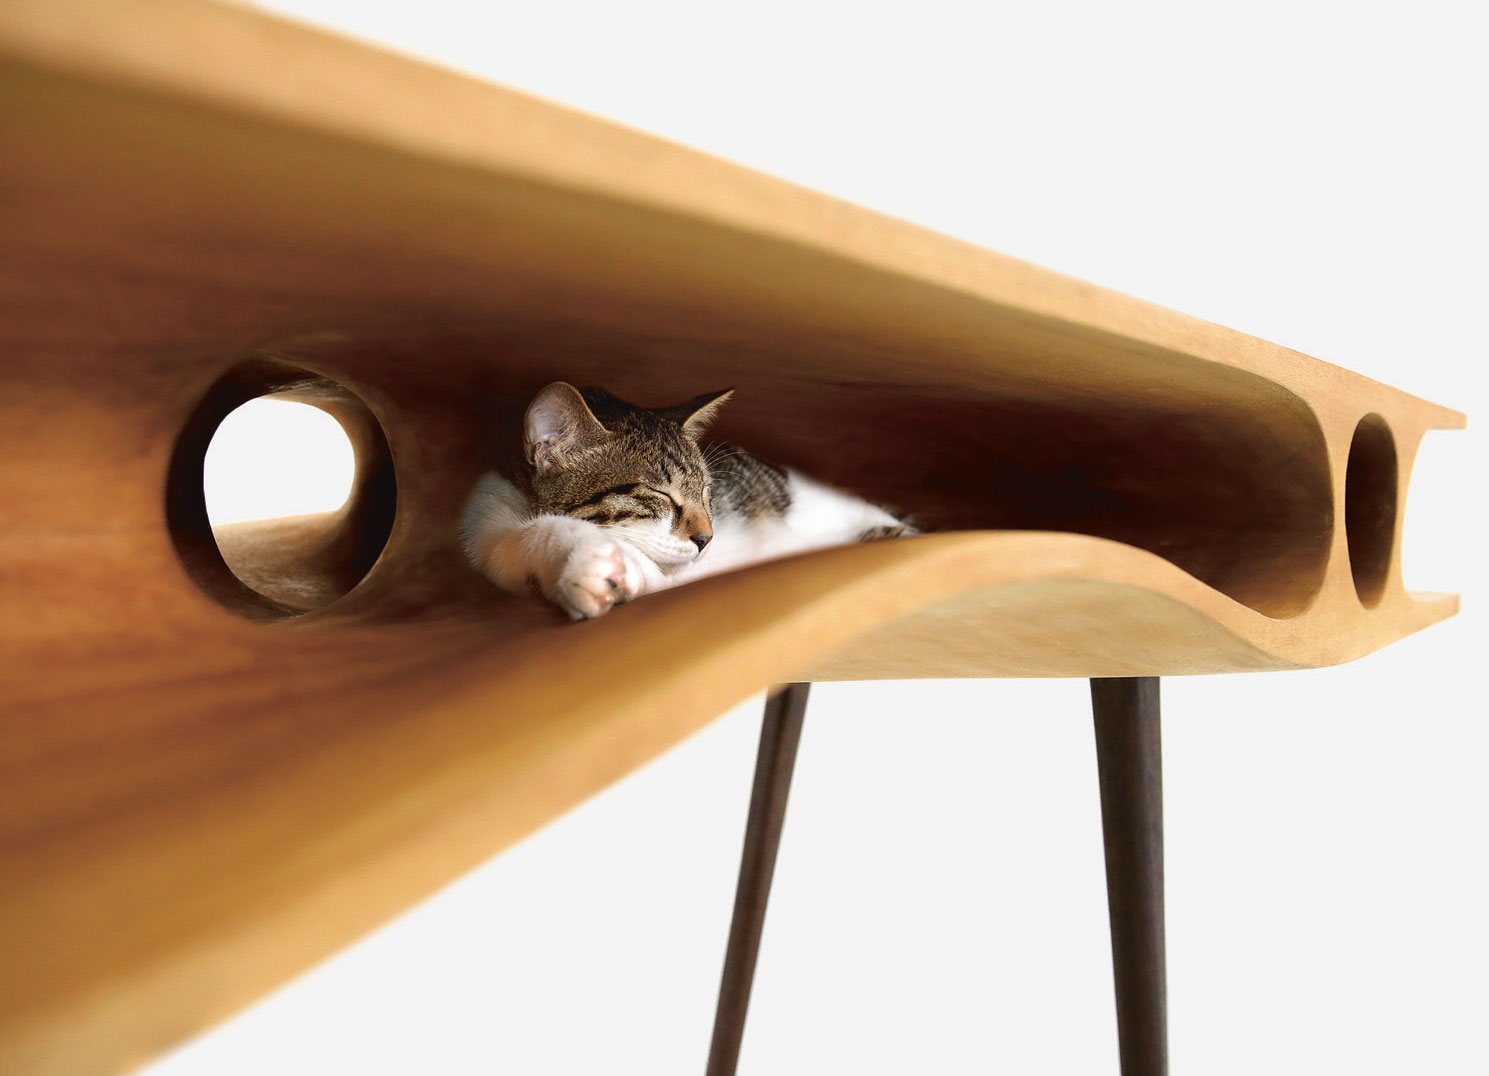 These cat homes will make your home look good too